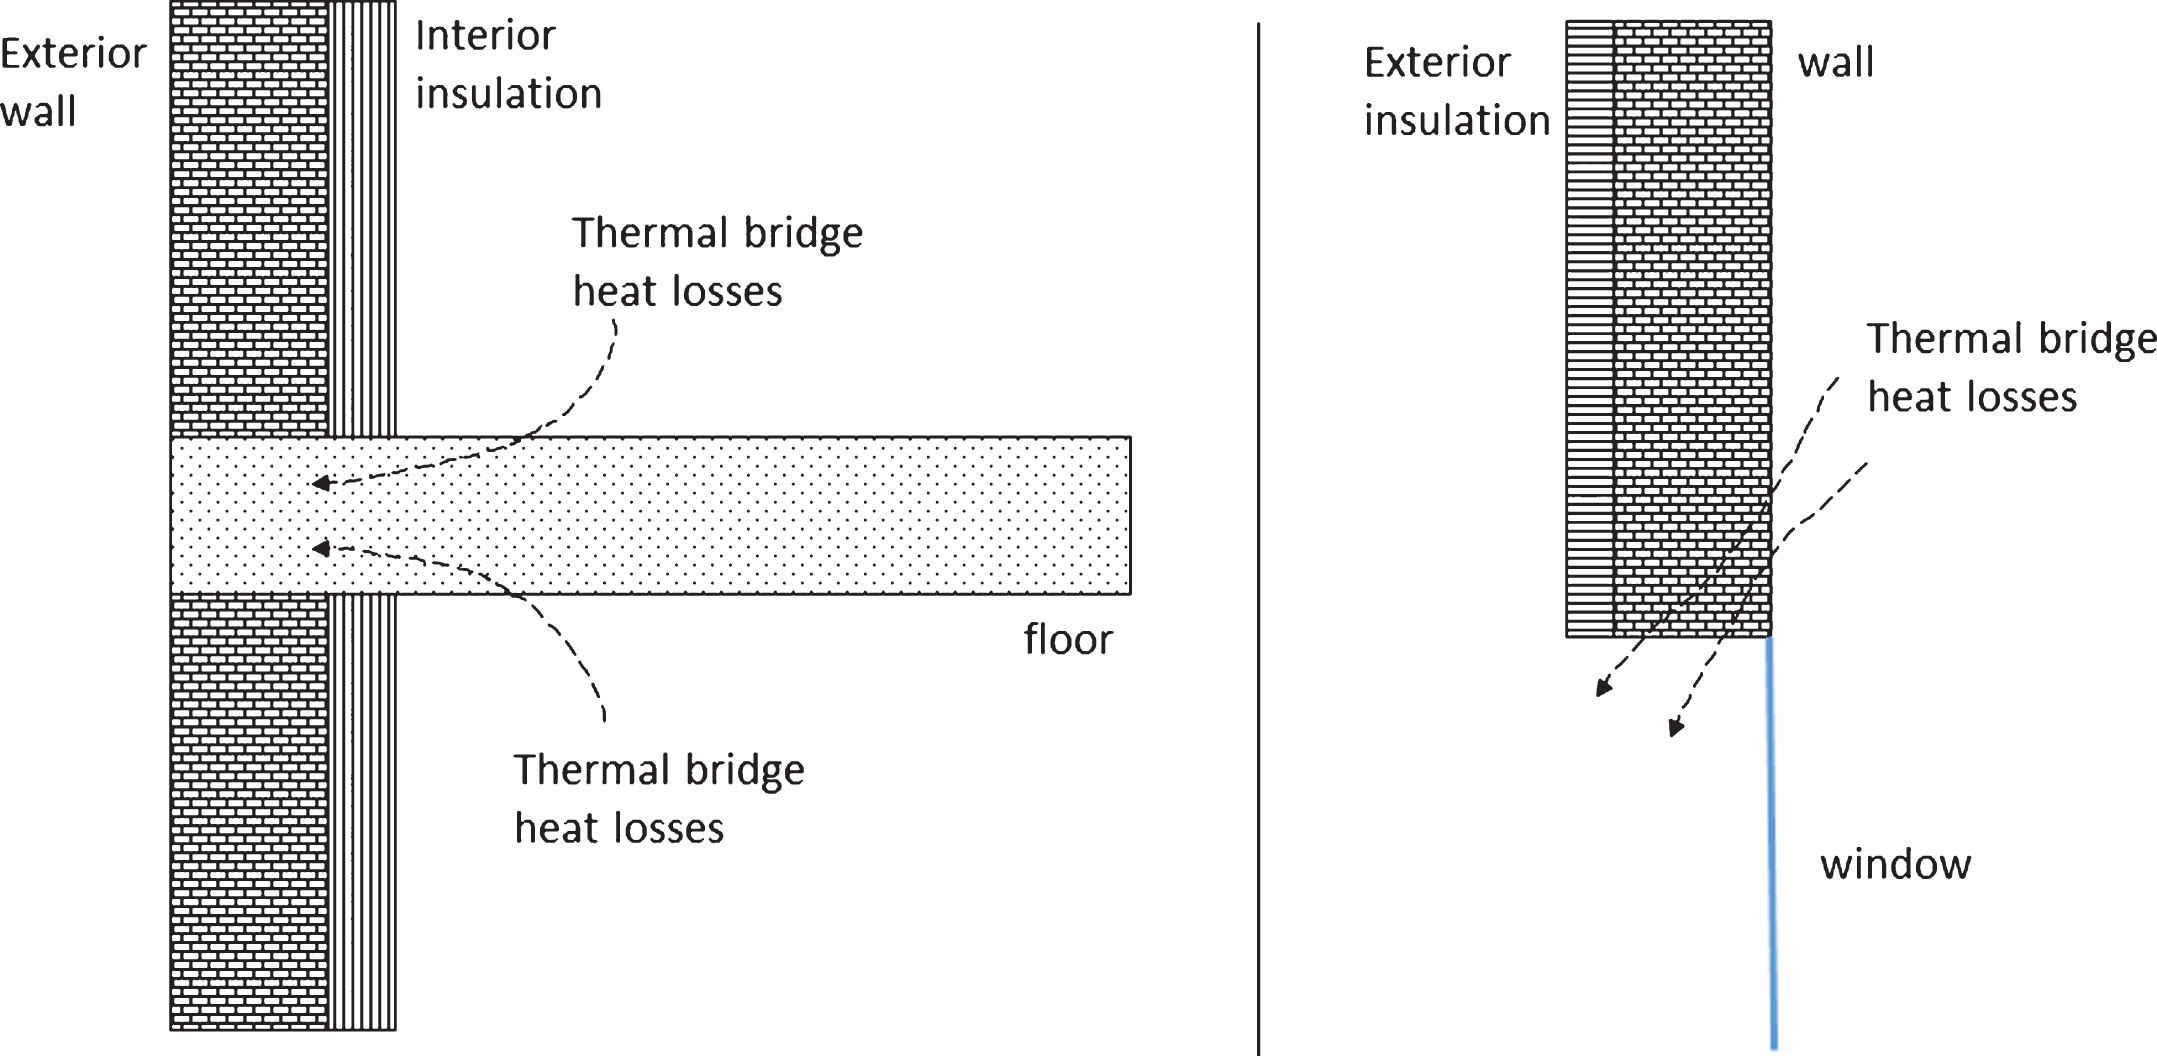 Thermal bridge heat losses through wall/floor junction (left) and window reveal (right).